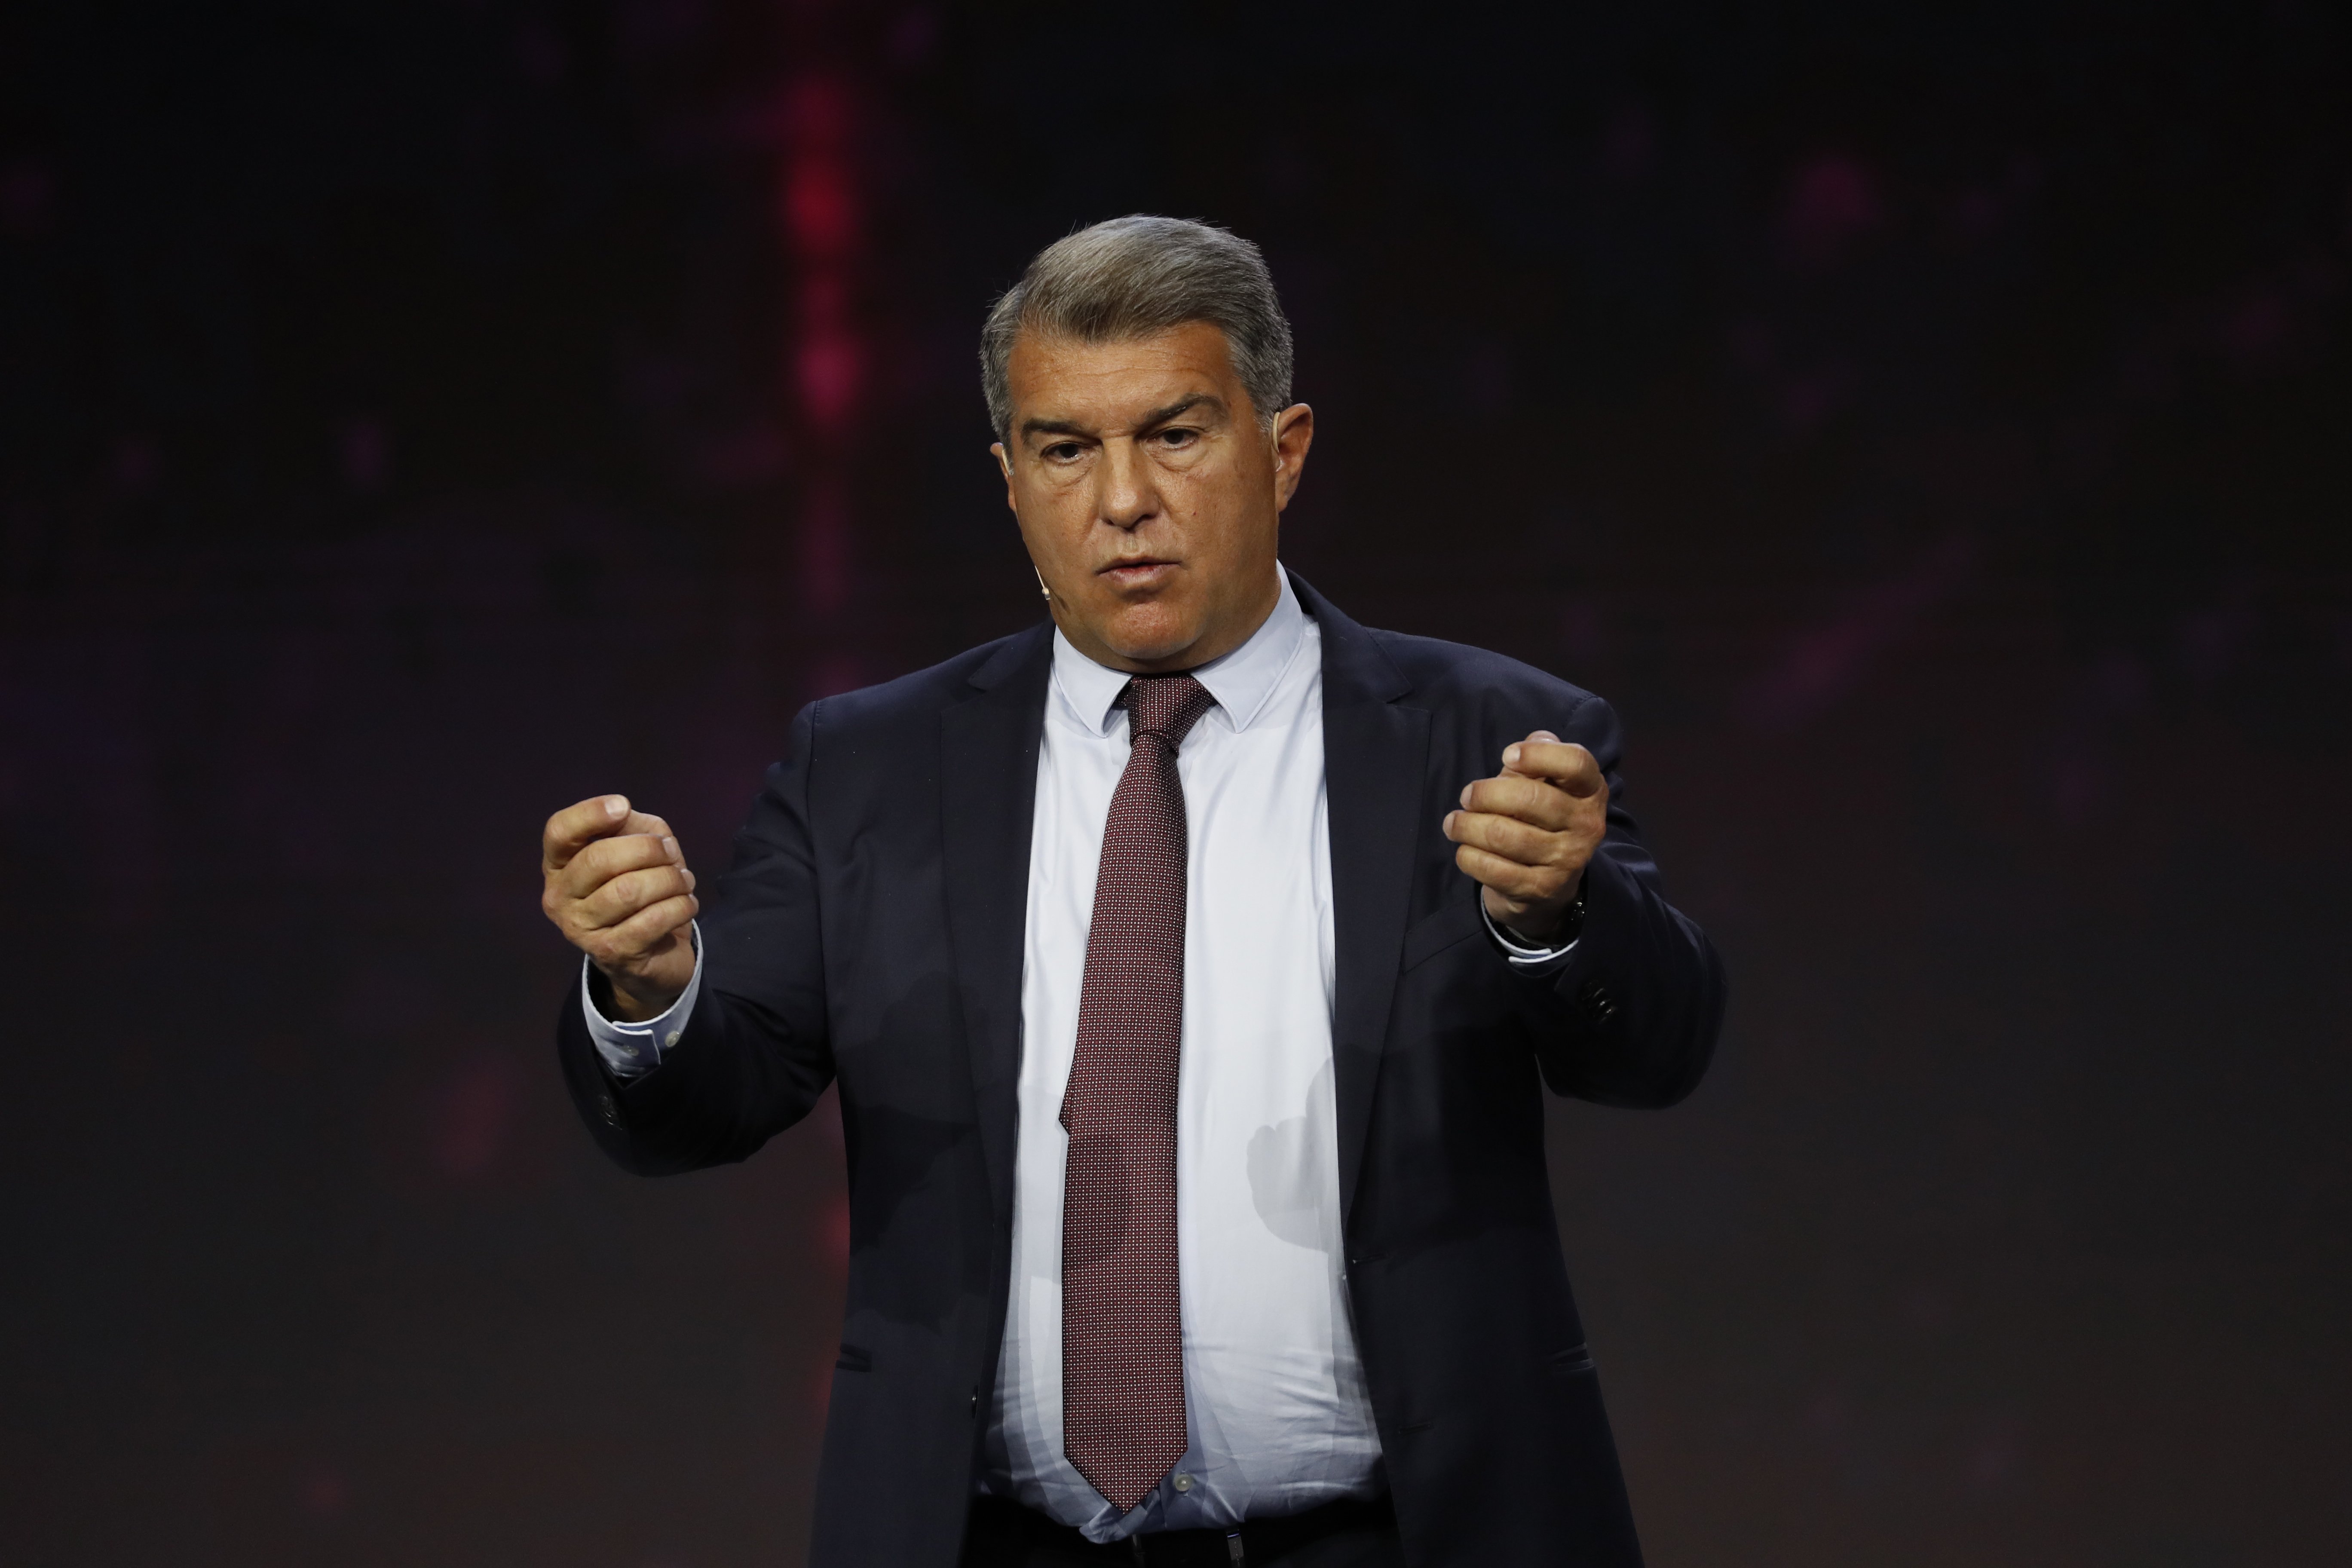 FC Barcelona will have its own metaverse and cryptocurrency, says Laporta